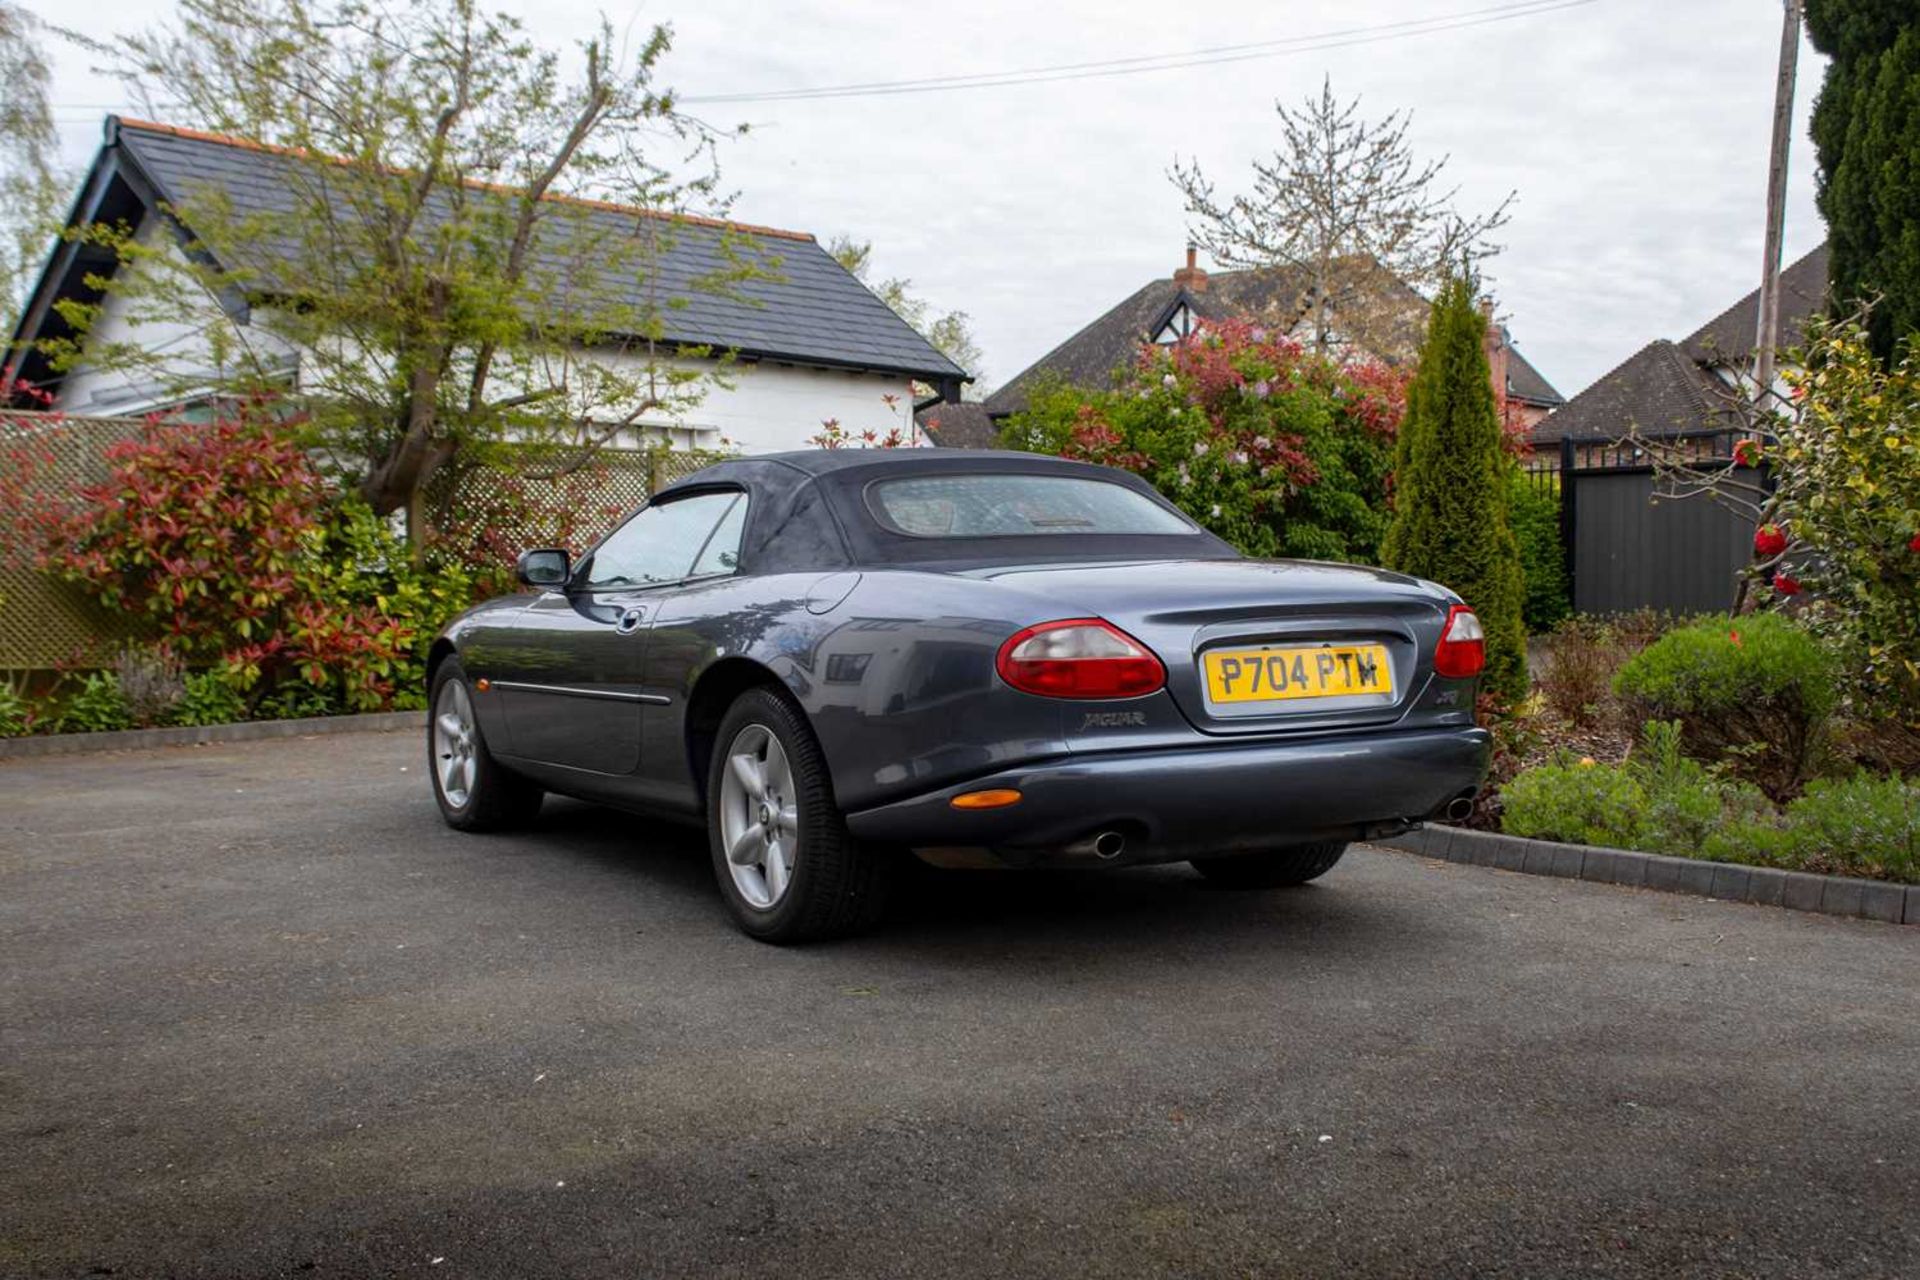 1997 Jaguar XK8 Convertible ***NO RESERVE*** Only one former keeper and full service history  - Image 11 of 89